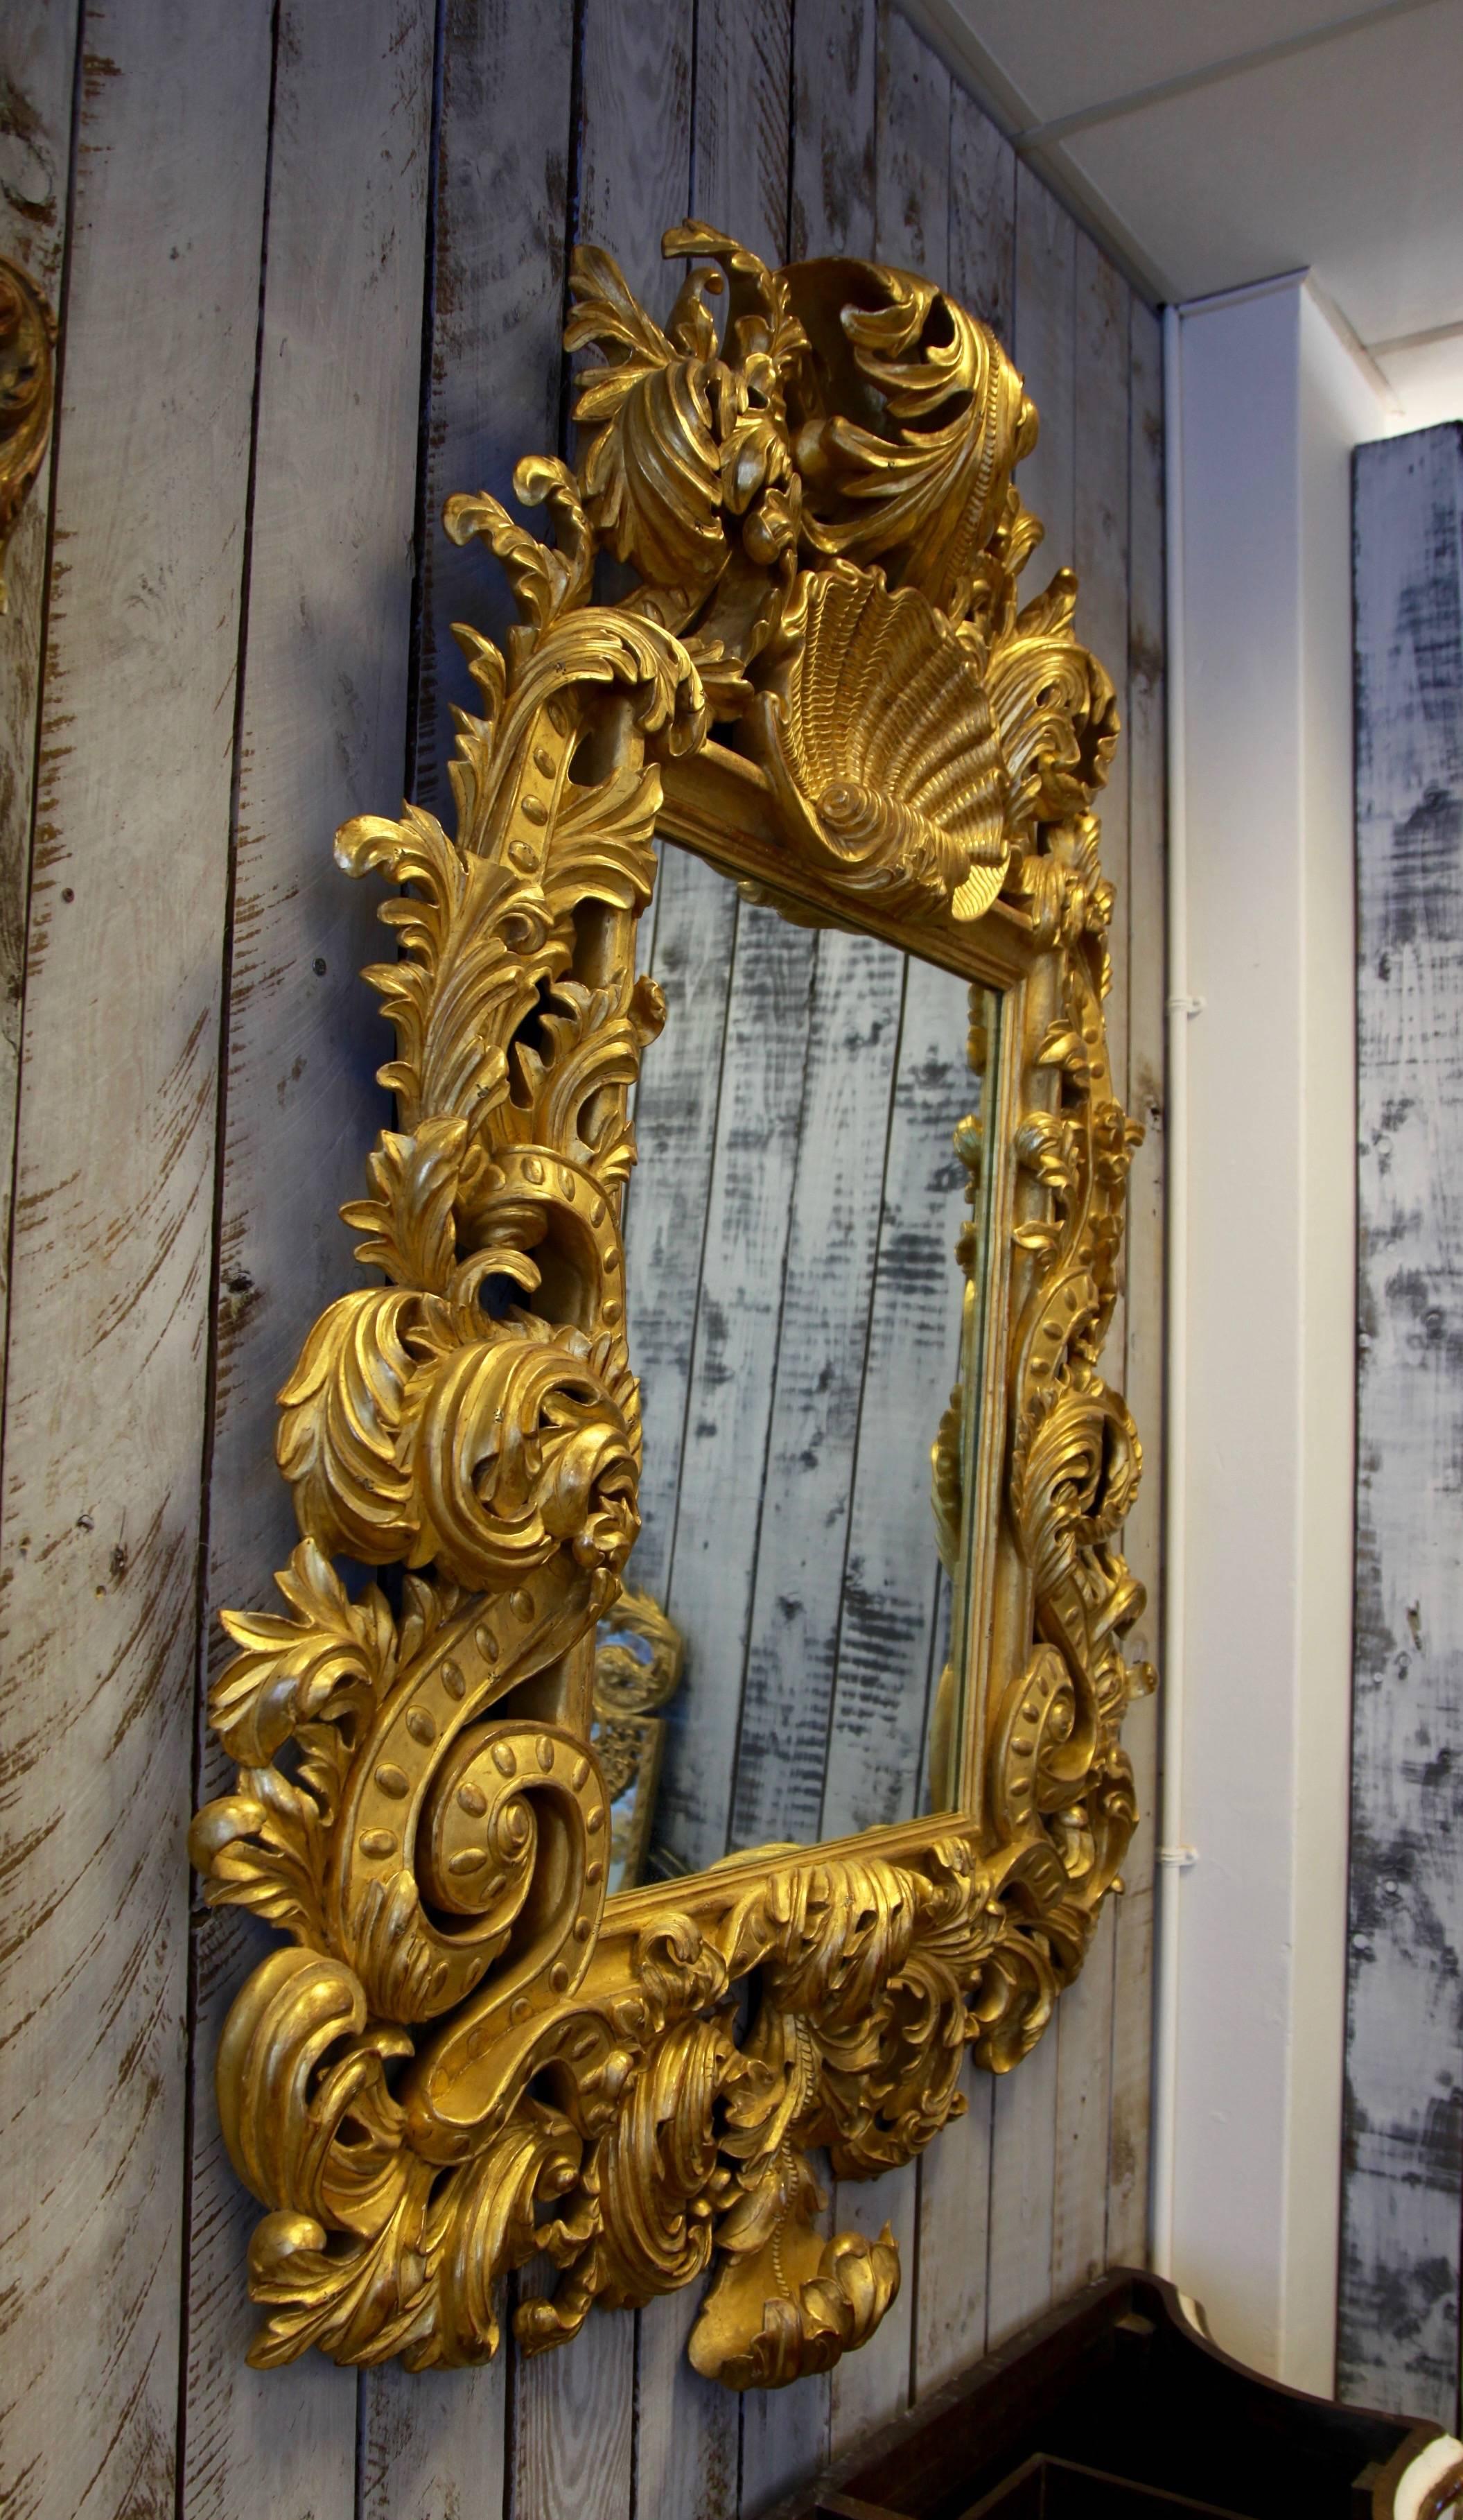 Hand carved Baroque style mirror with exceptional detailing, finished in hand applied 23.75-karat gold leaf.
We have 2 available.